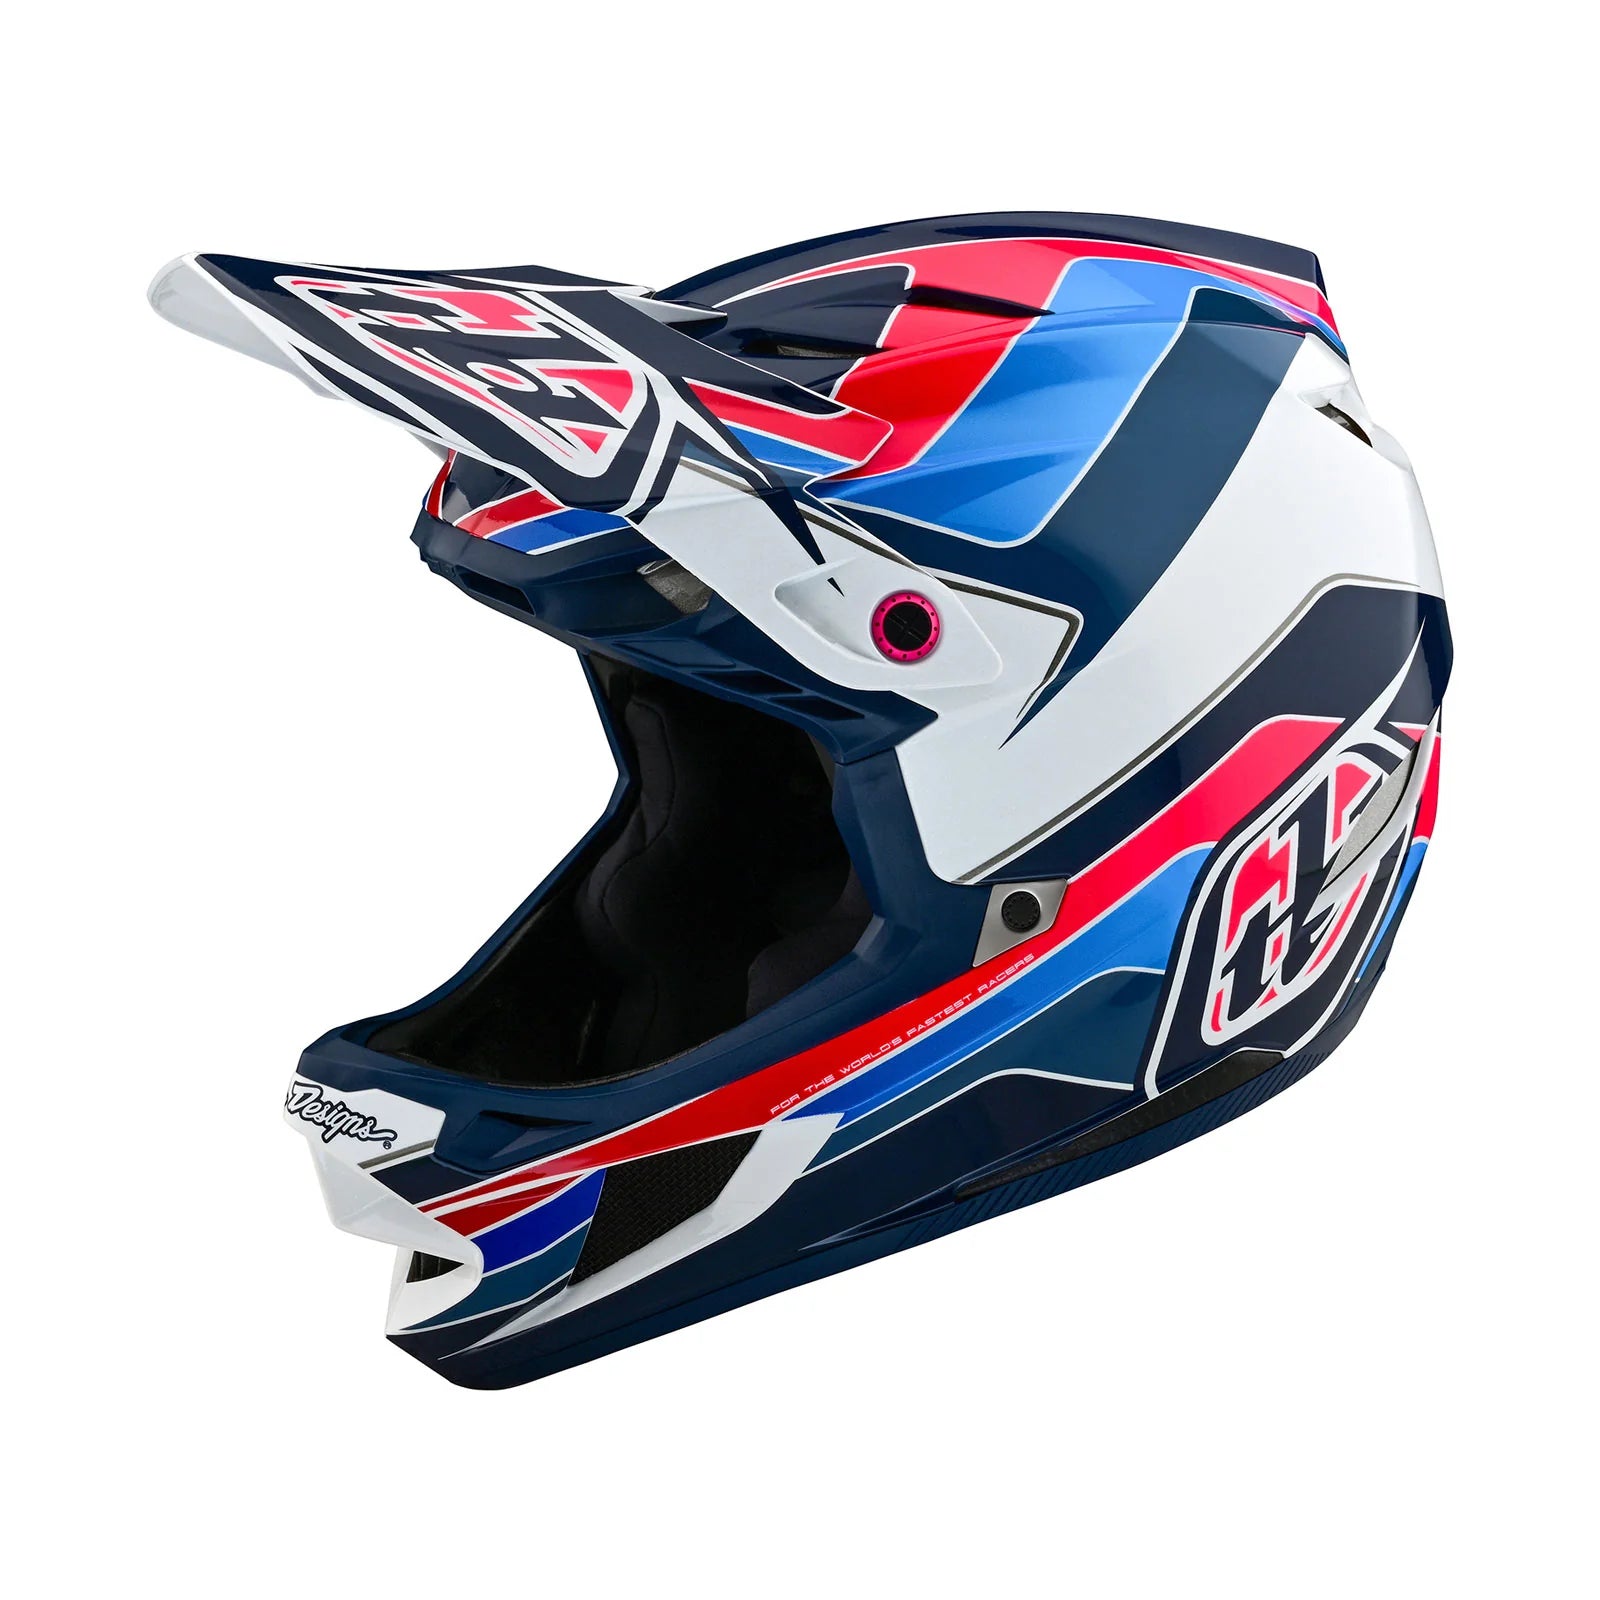 A TLD D4 AS Polyacrylite Helmet W/MIPS Block Blue / White with a red, white, and blue design ensuring maximum safety.